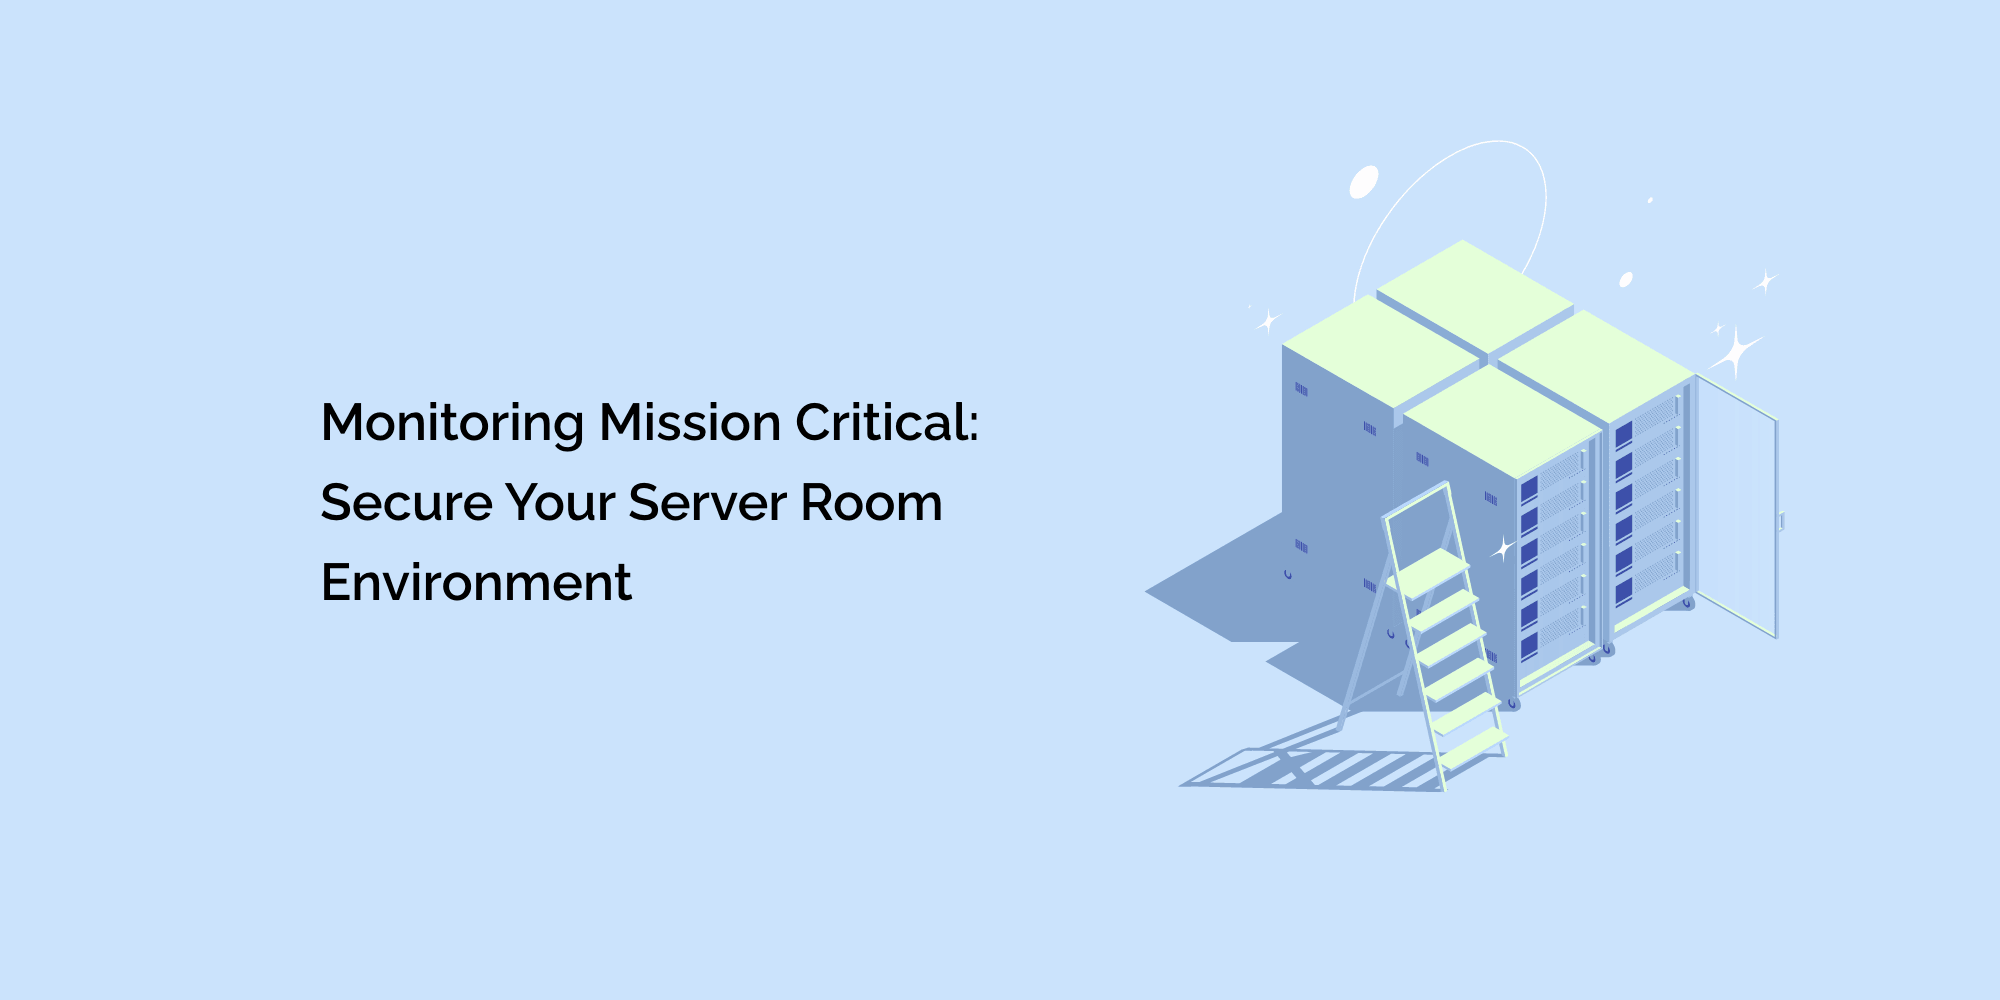 Monitoring Mission Critical: Secure Your Server Room Environment